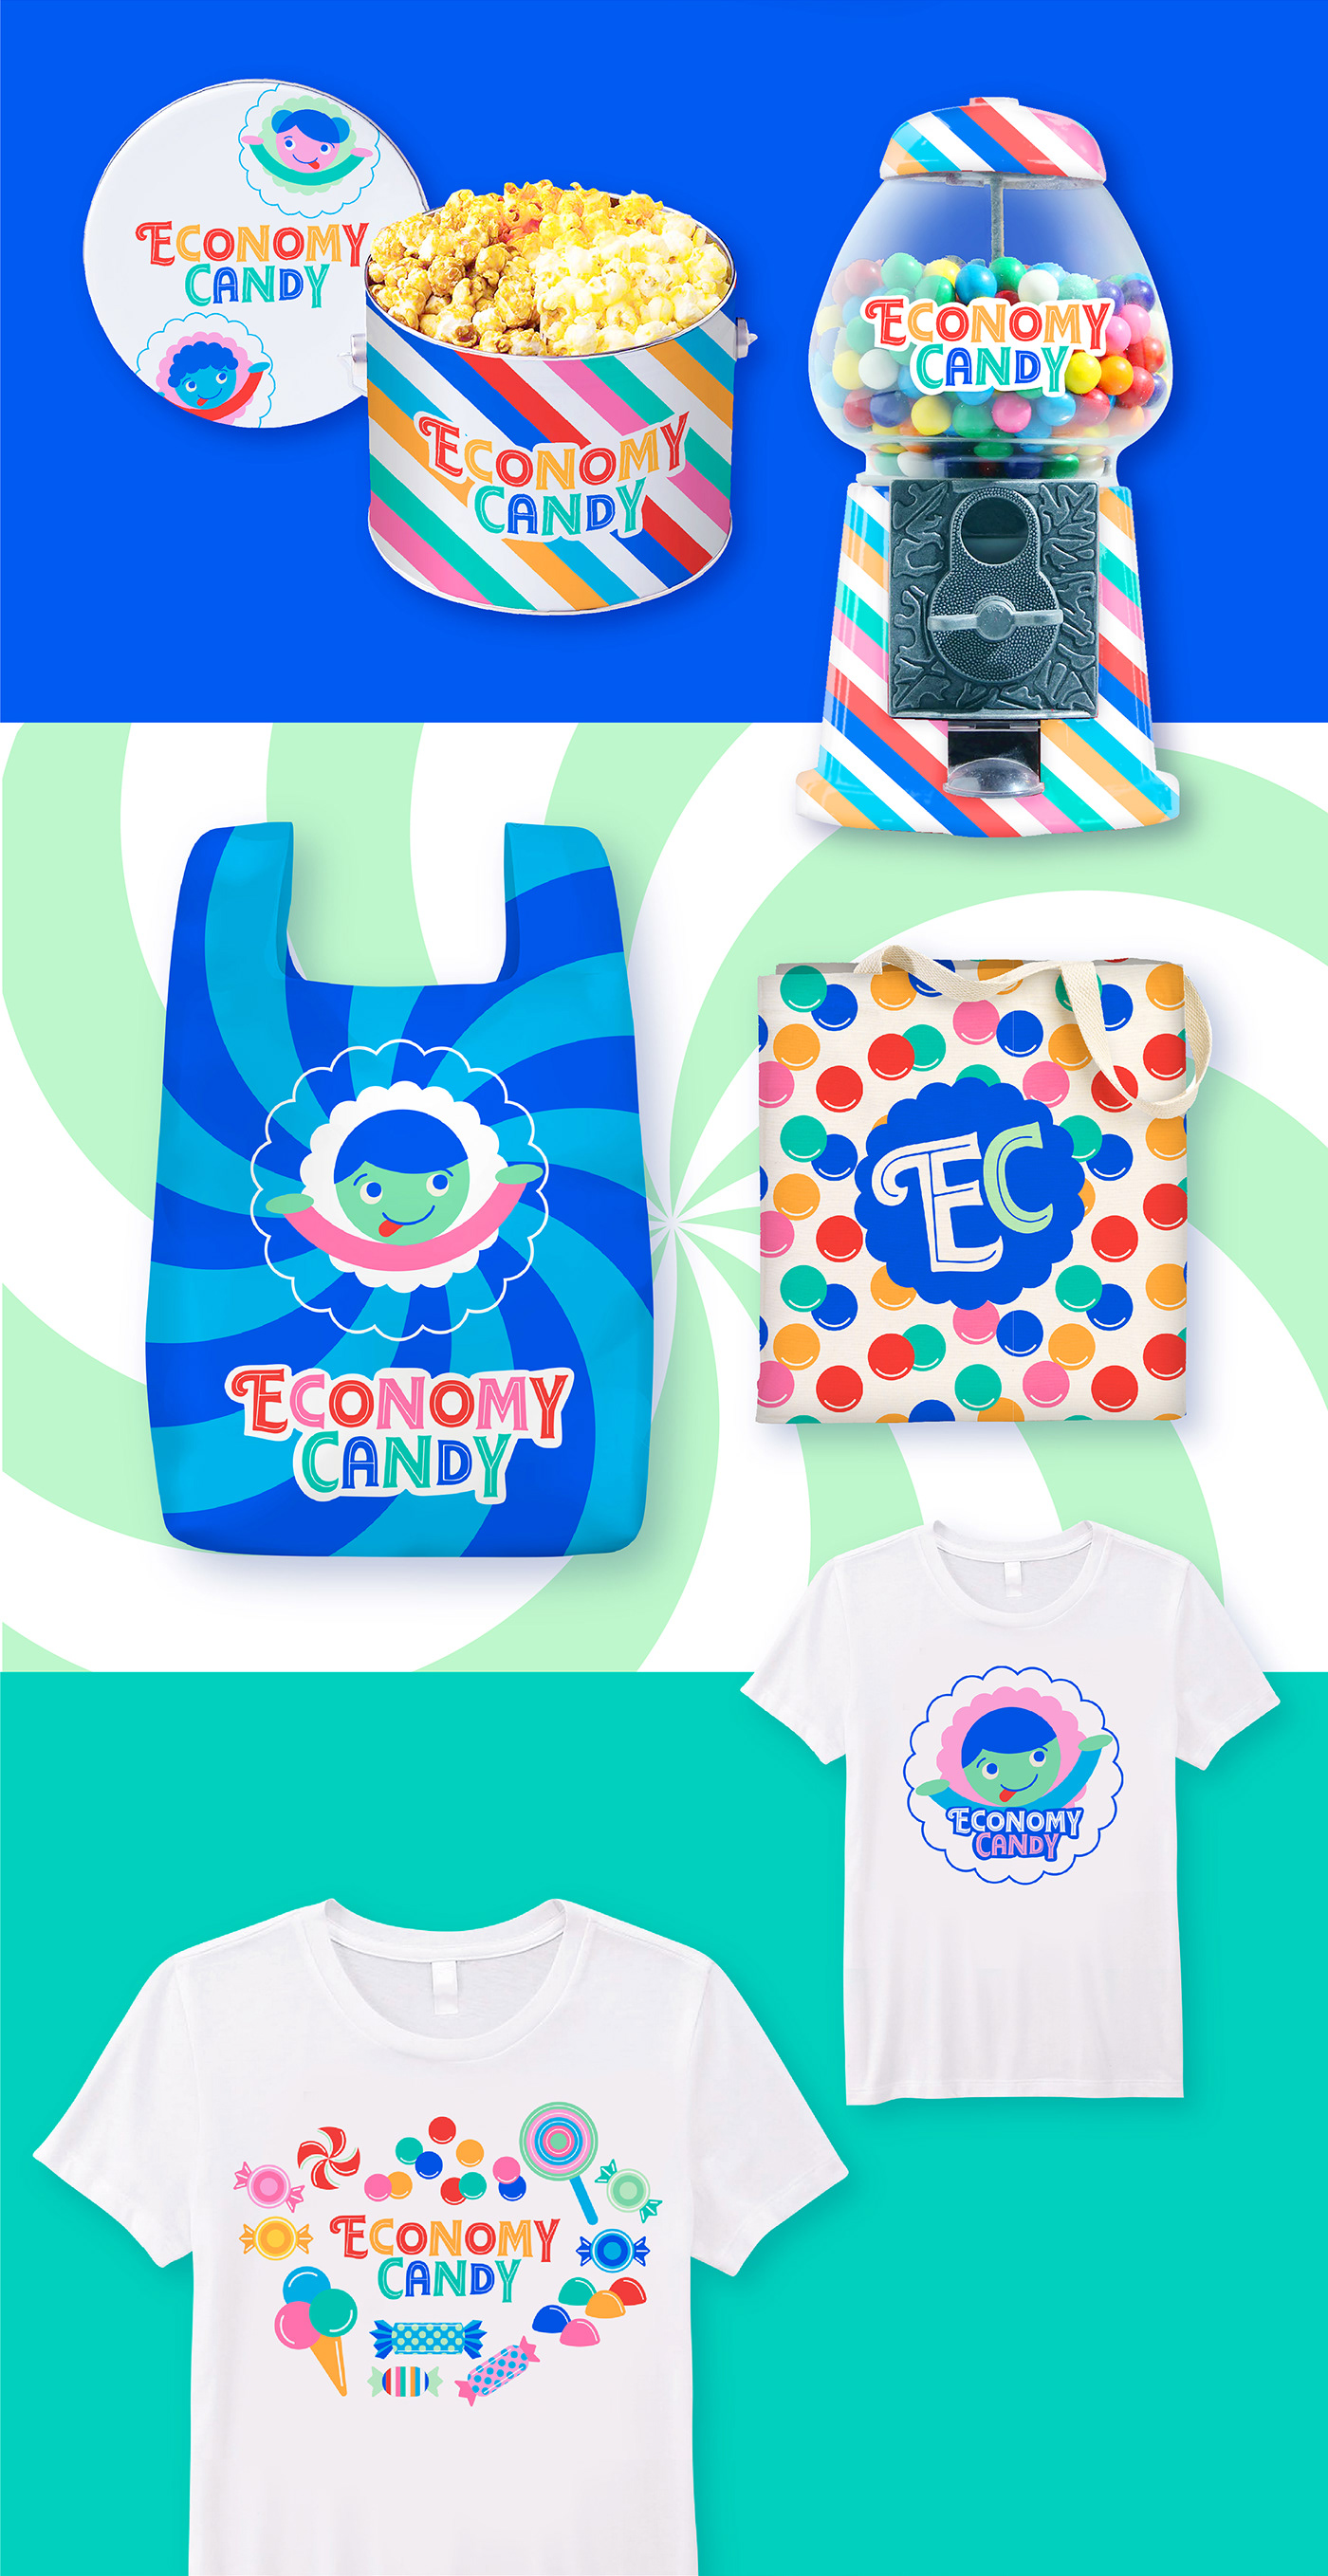 branding  brand identity Candy Packaging bright colorful Fun Business Cards Website